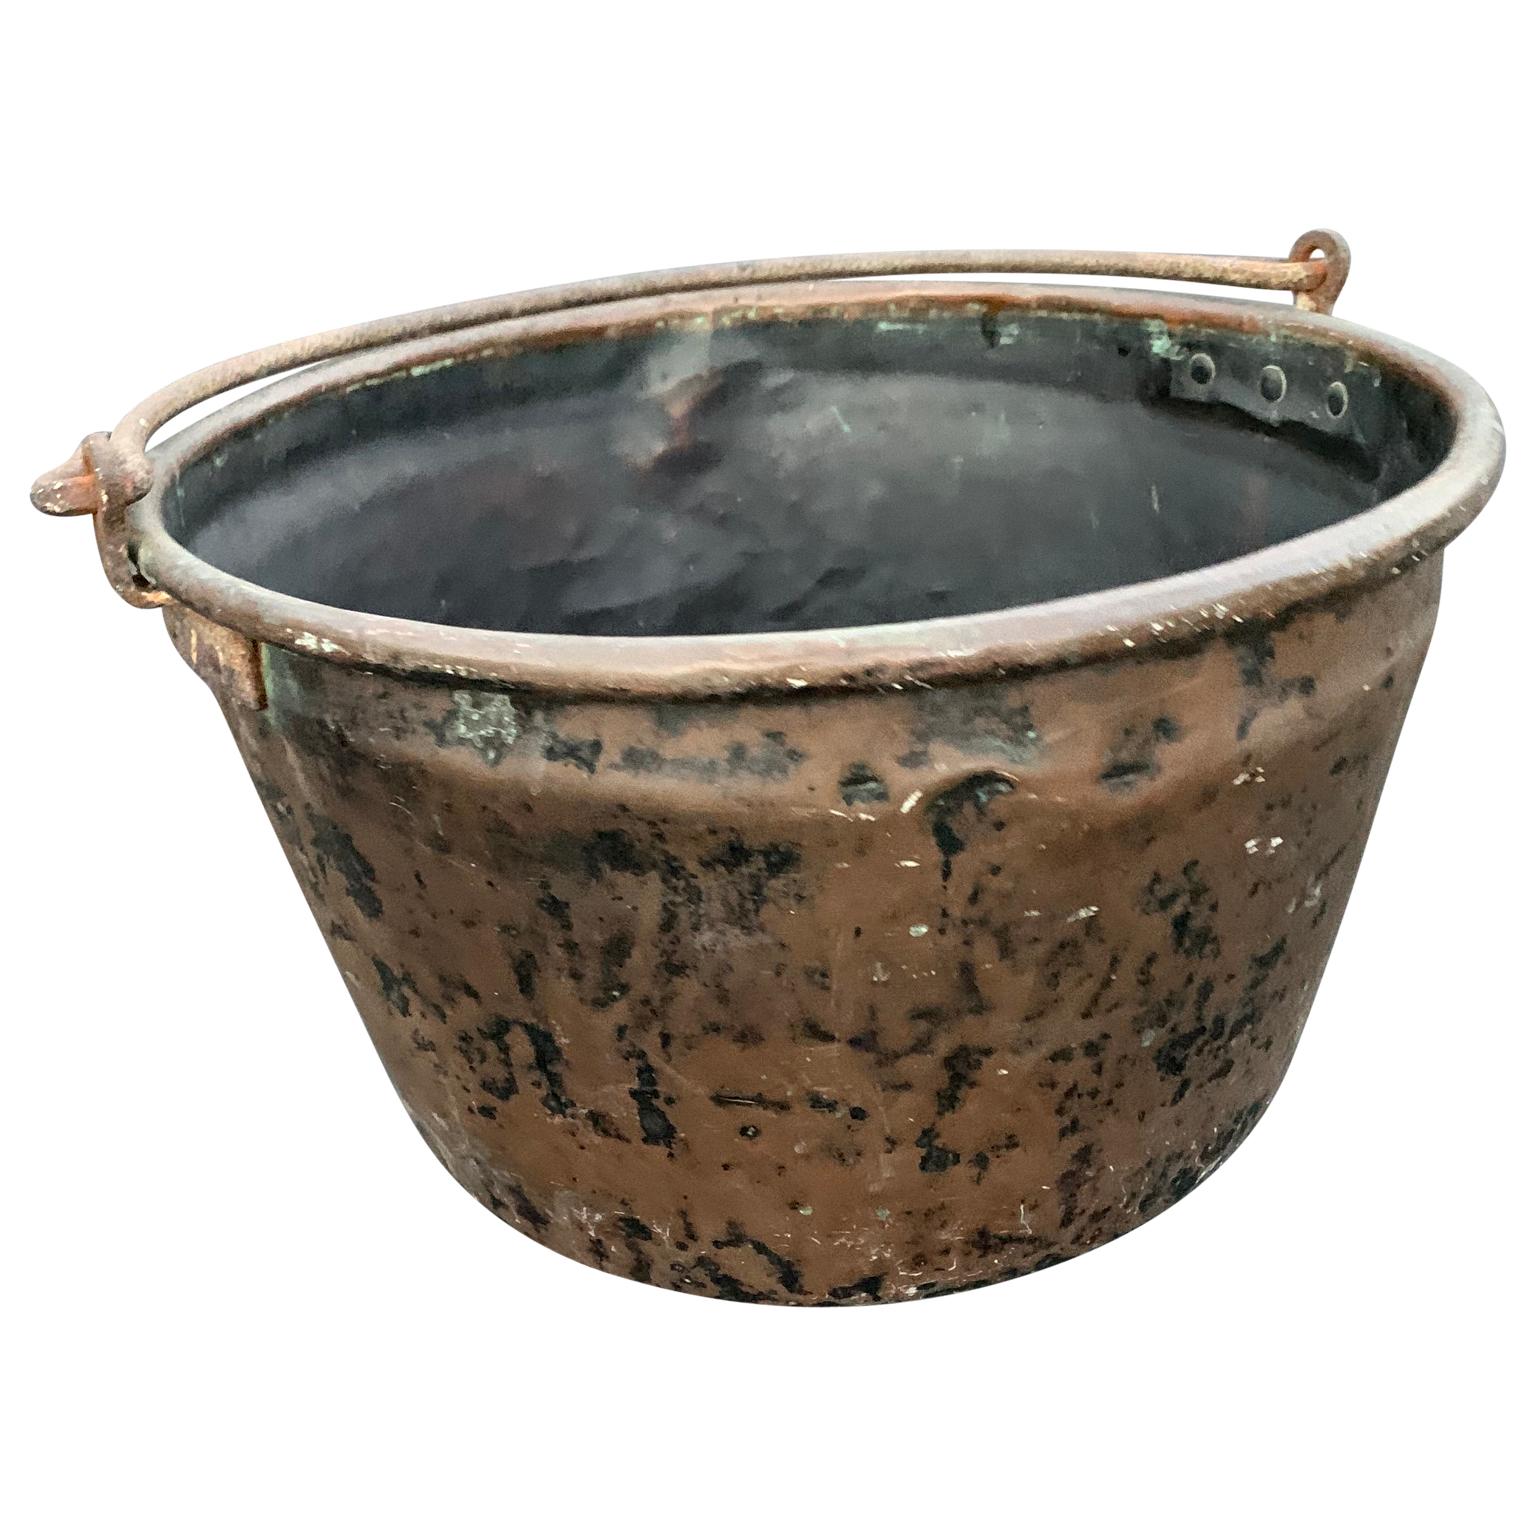 Massive Copper Cauldron Or Log Holder. 

This one takes the price for size, not that it matters but still.